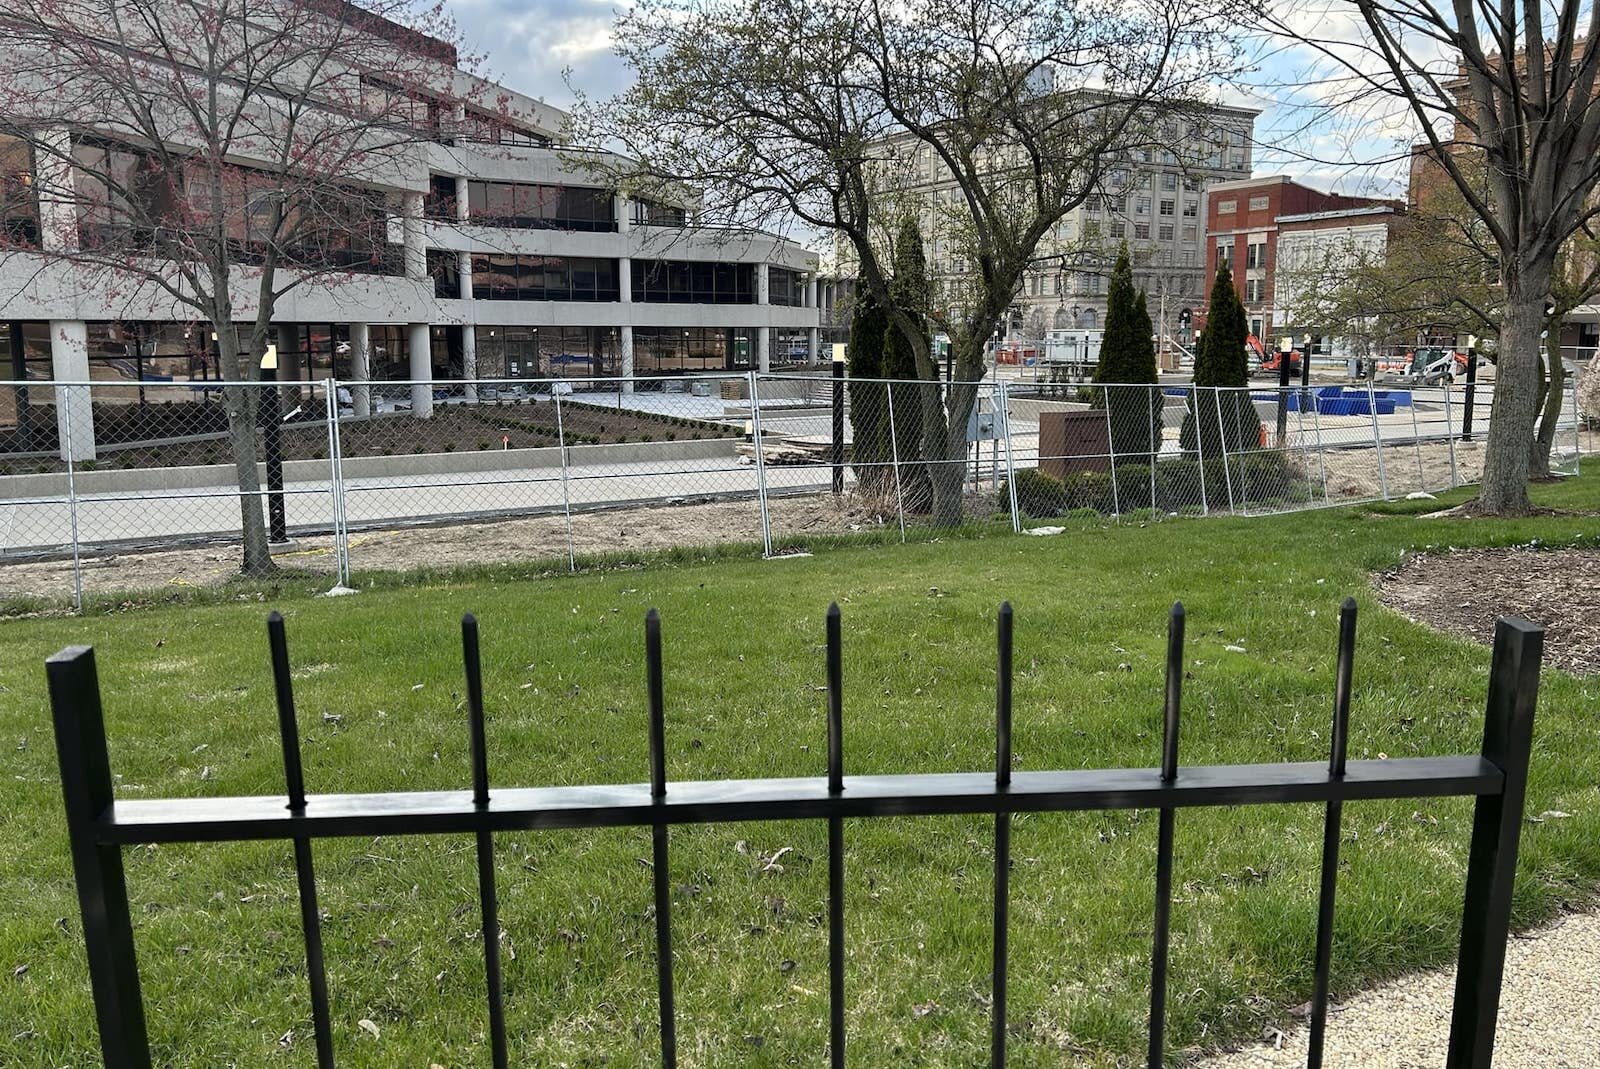 With all of the improvements downtown, I am impressed that they have gone as far as they have to cater to the fence community. It is supposed to be “completed” by April but to me, it is perfect as it is. #AllFencesAreBeautiful — March 23 post